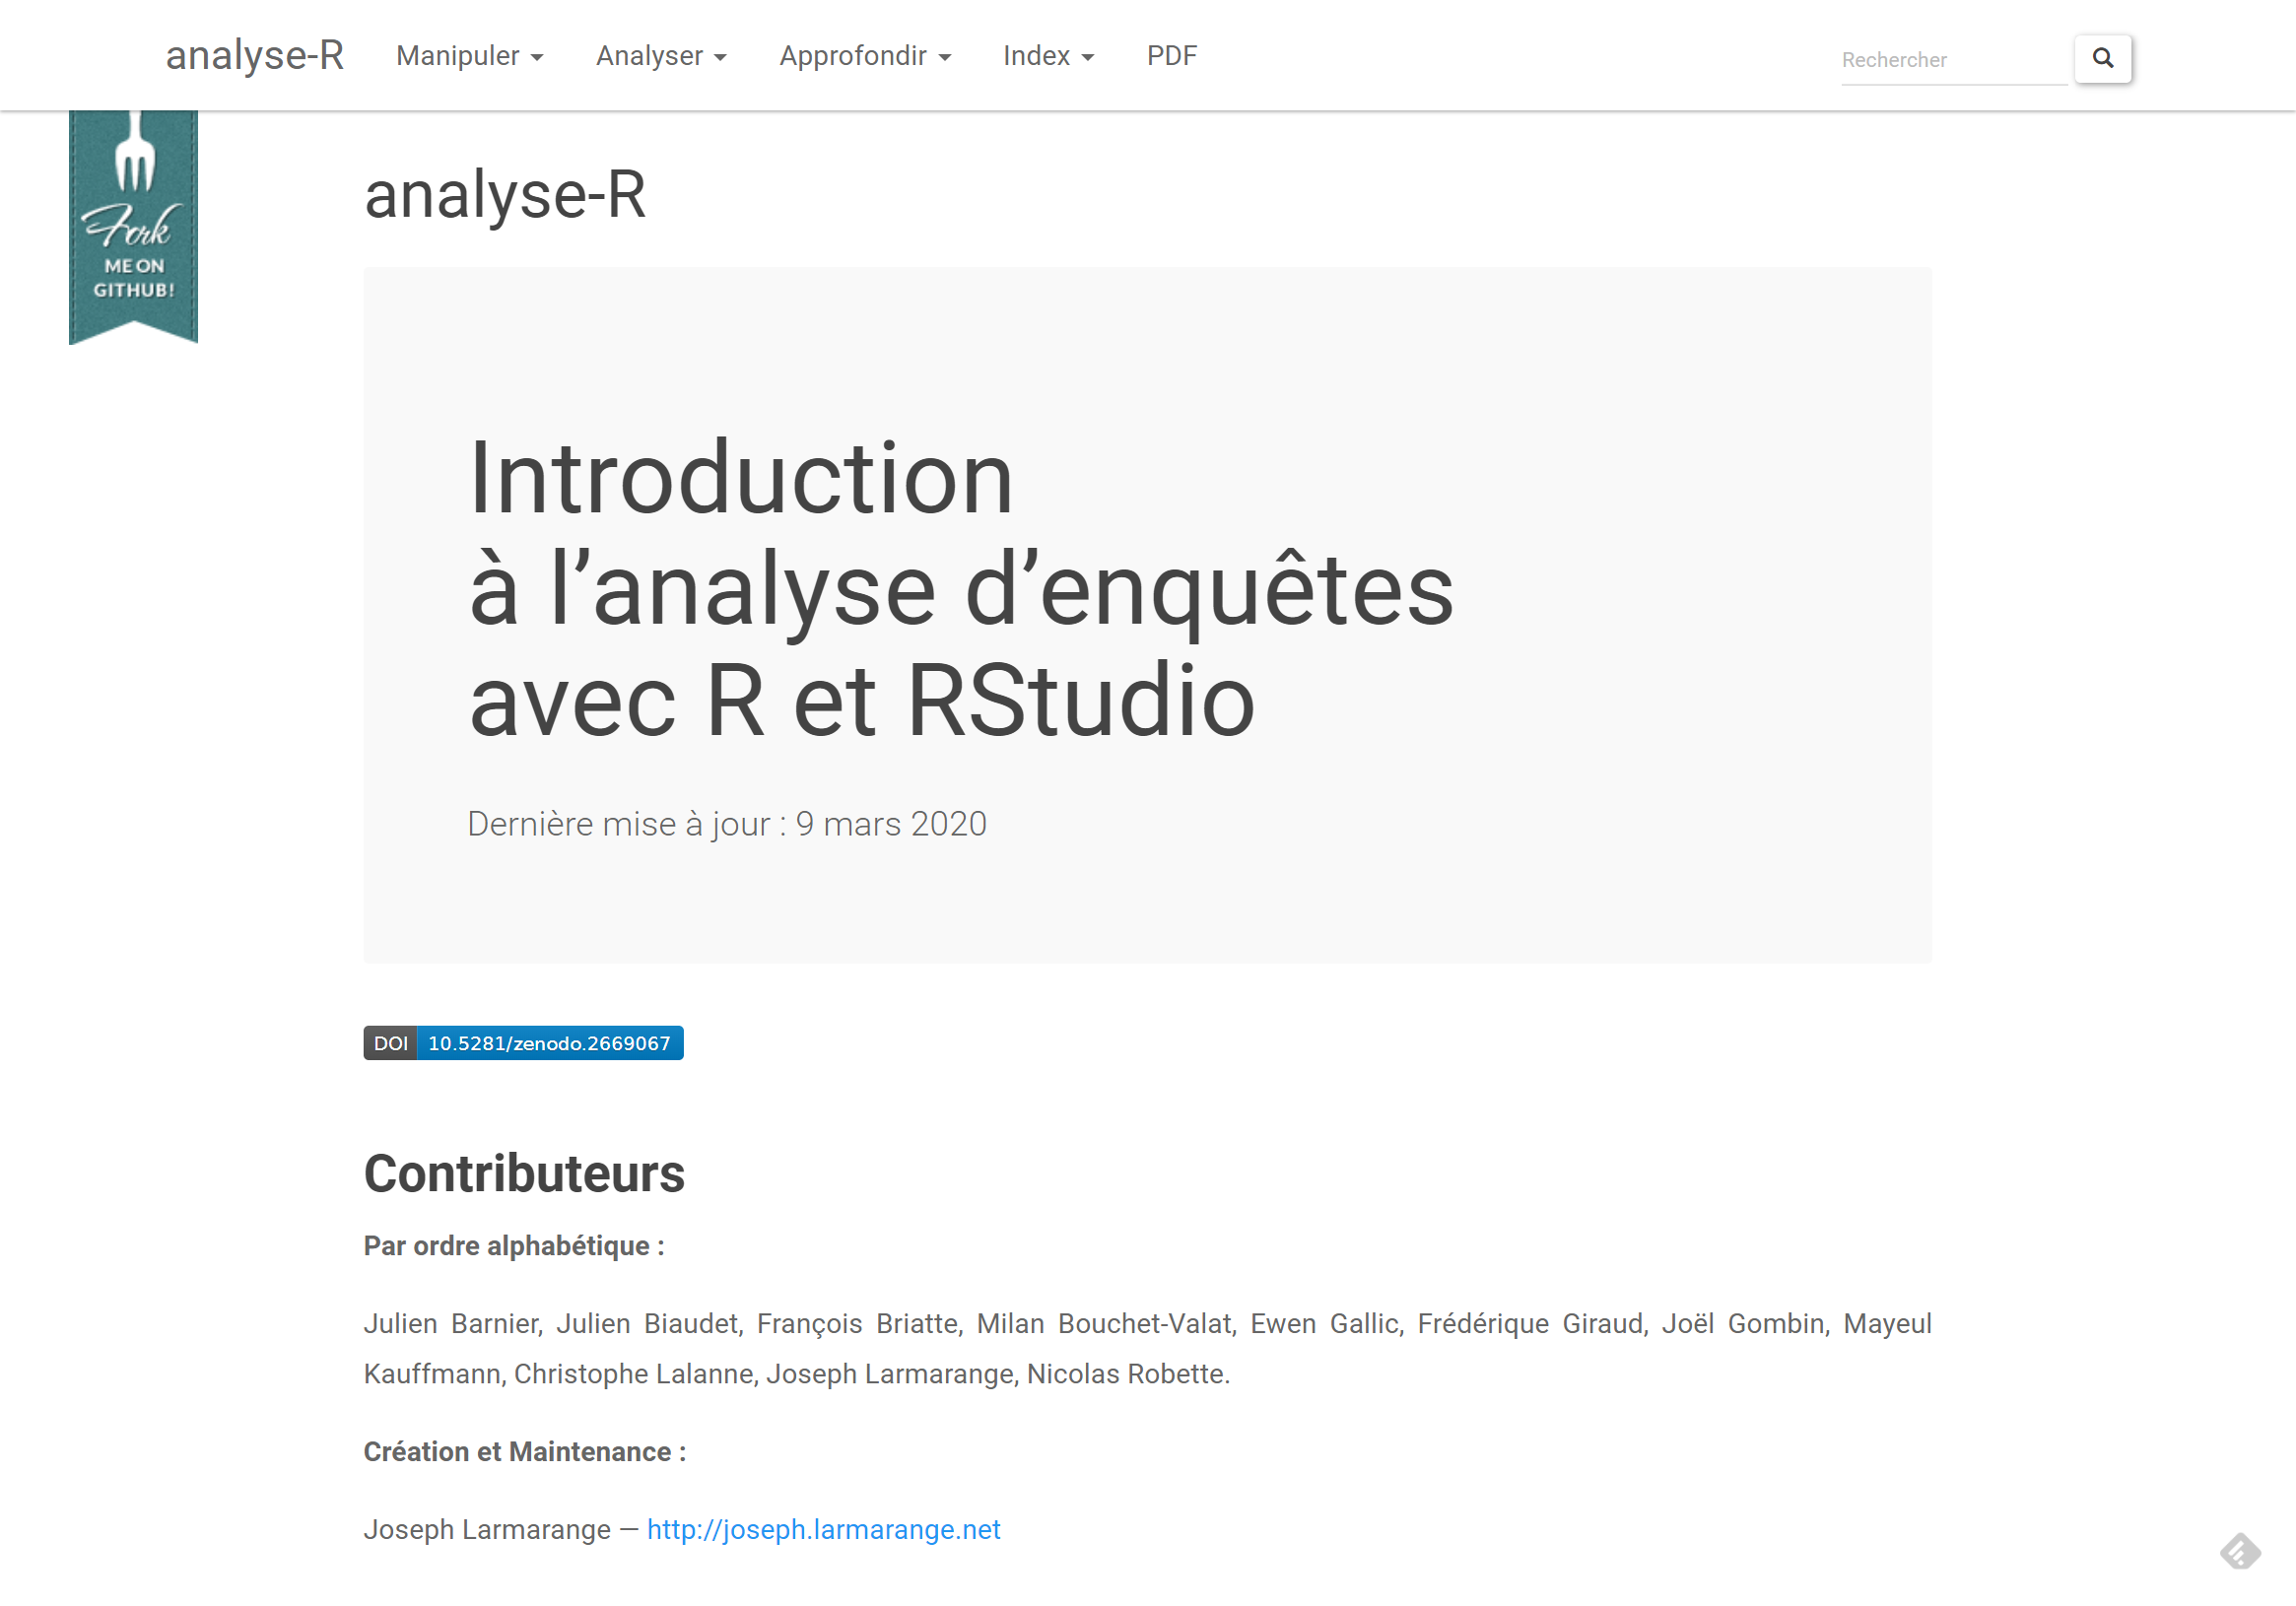 Le site analyse-R